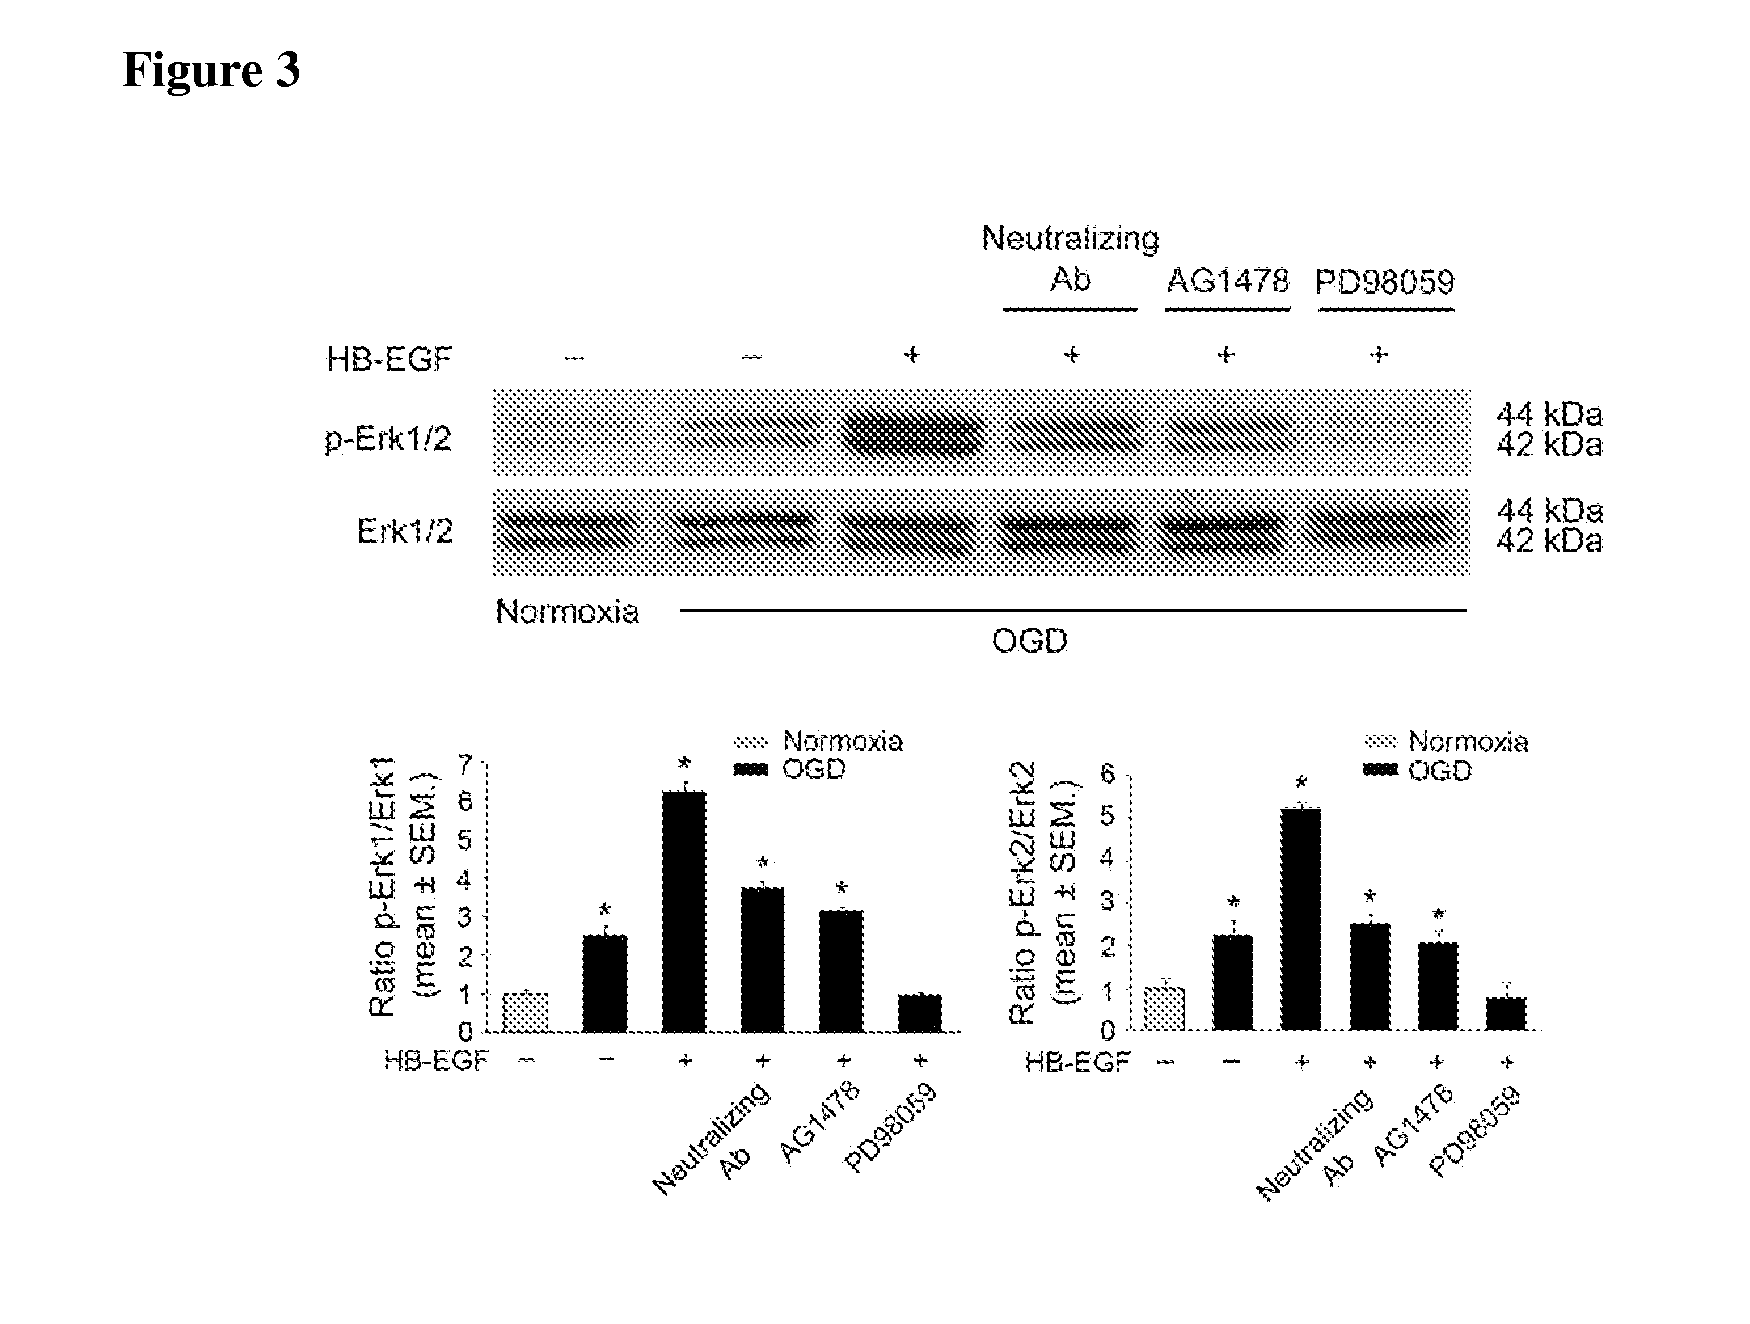 Administration of HB-EGF for the Protection of Enteric Neurons